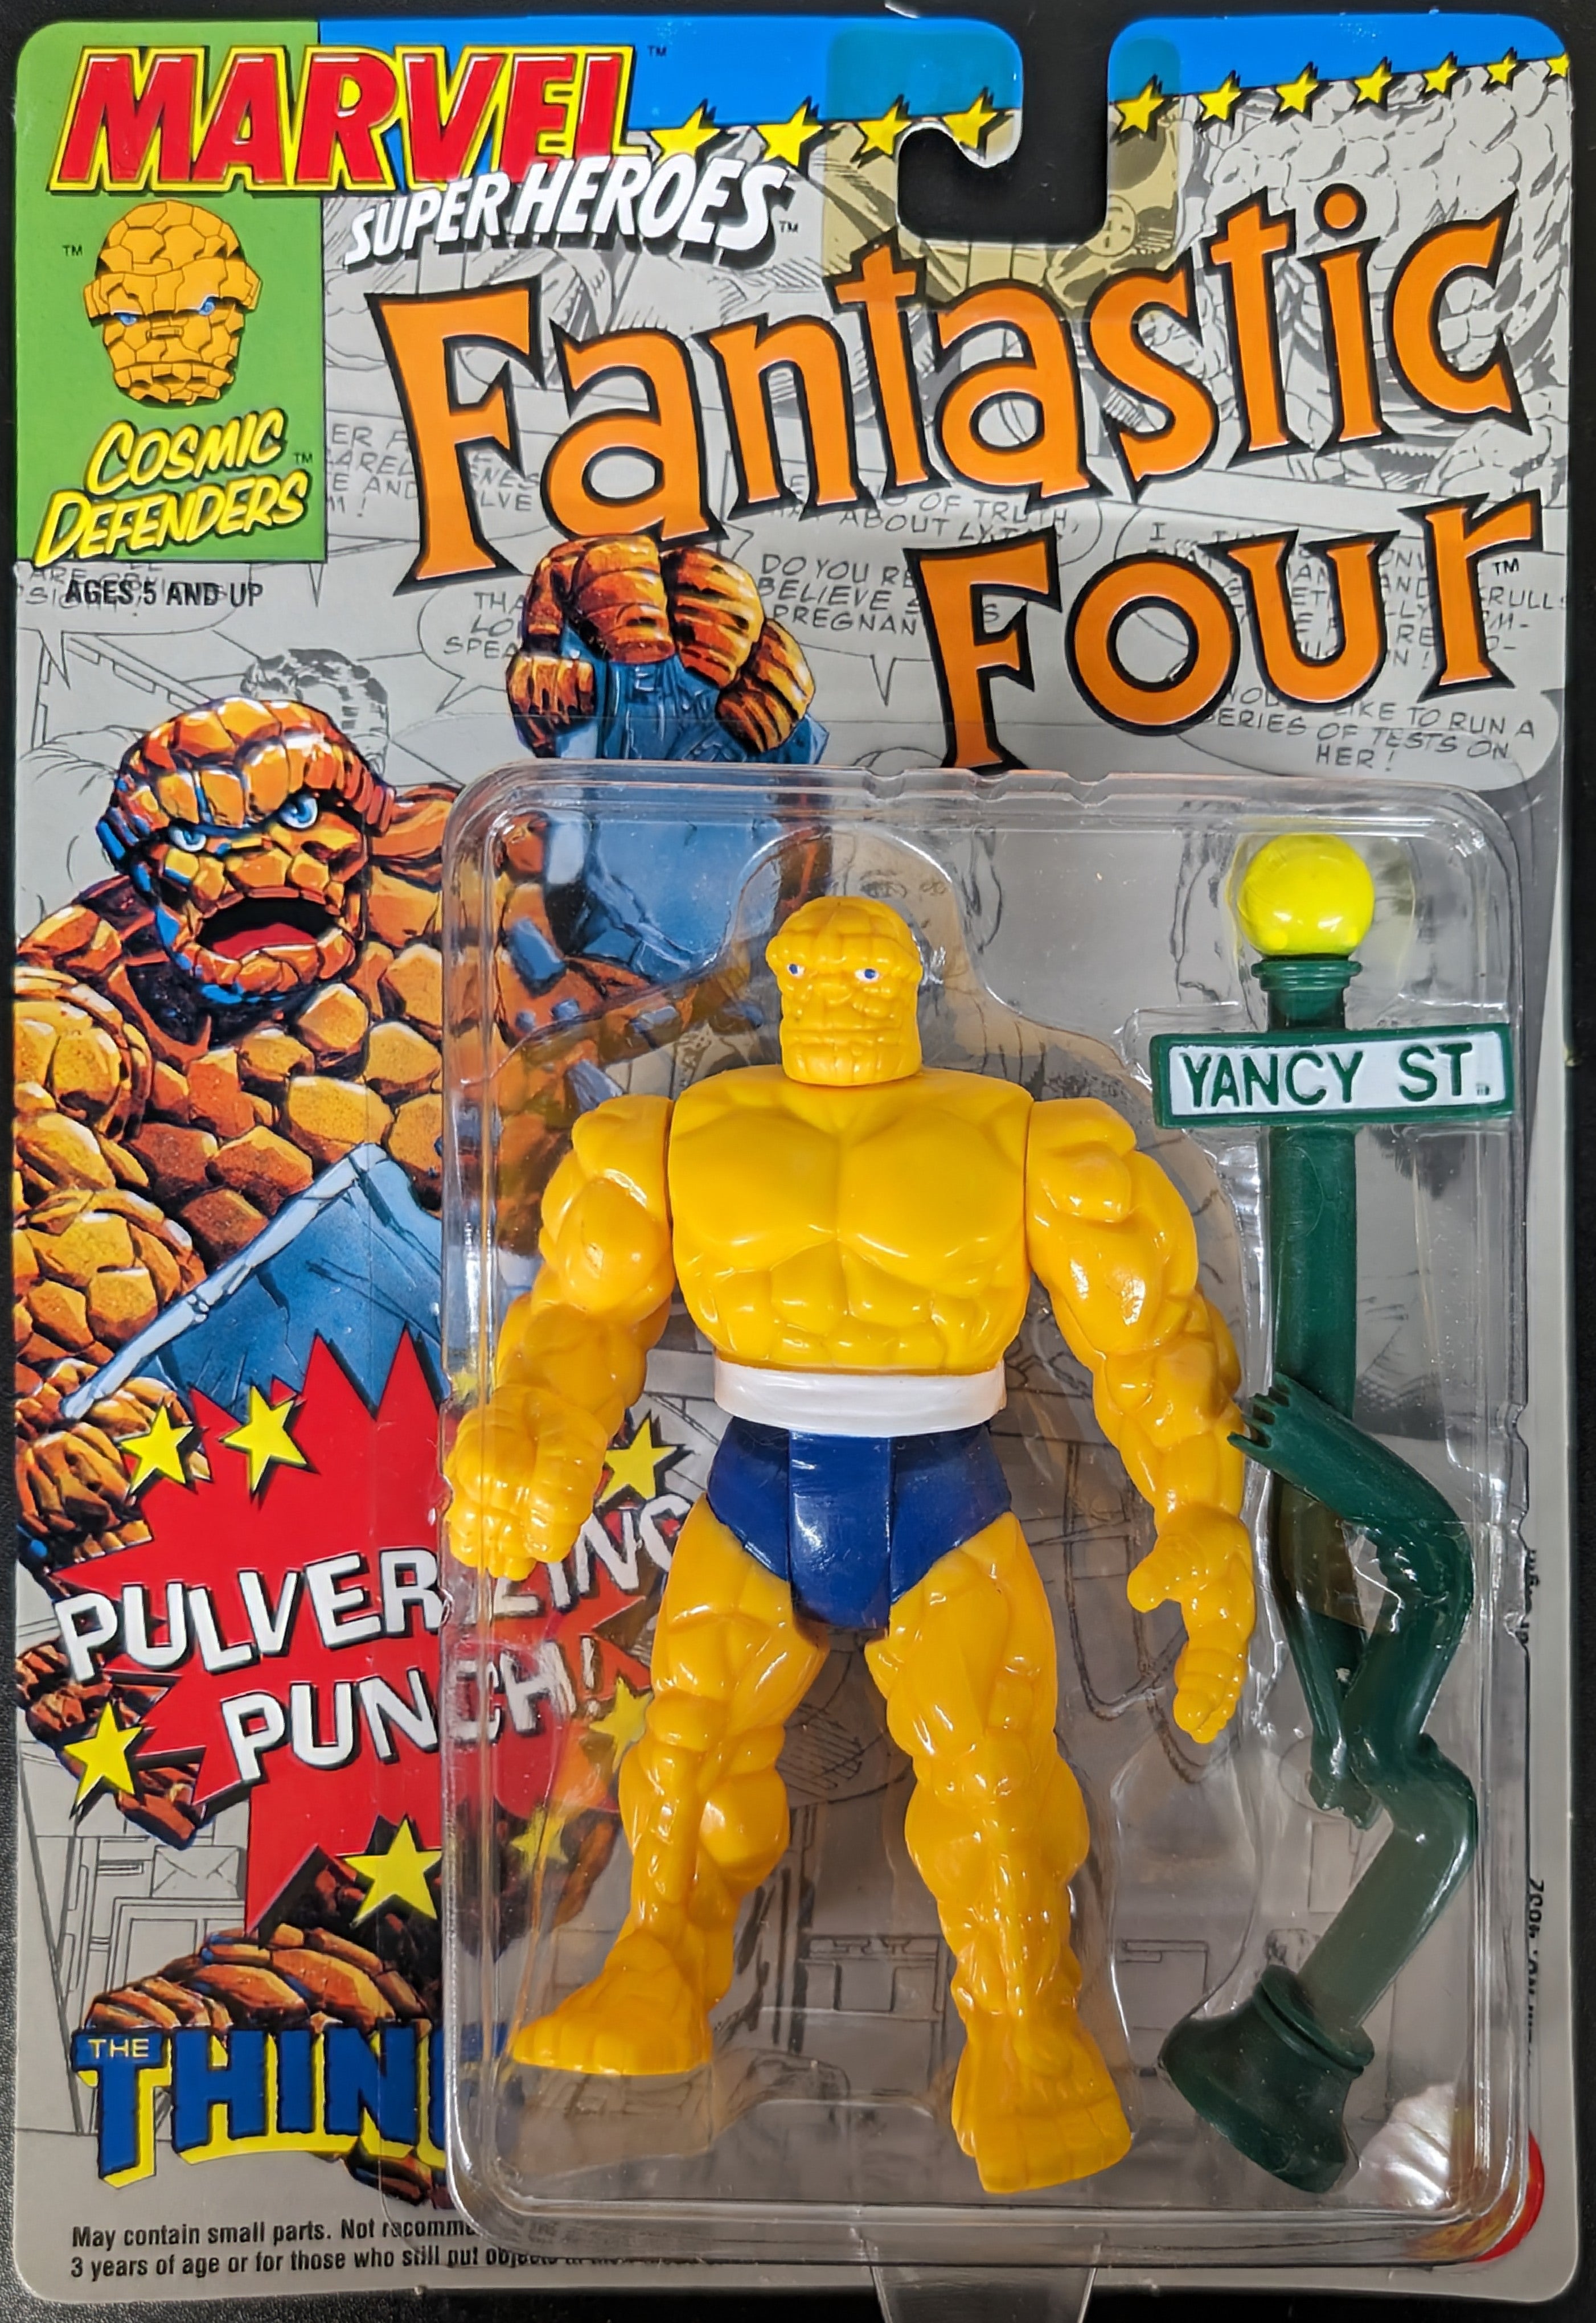 1992 Toy Biz Marvel Super Heroes Action Figures: The Thing